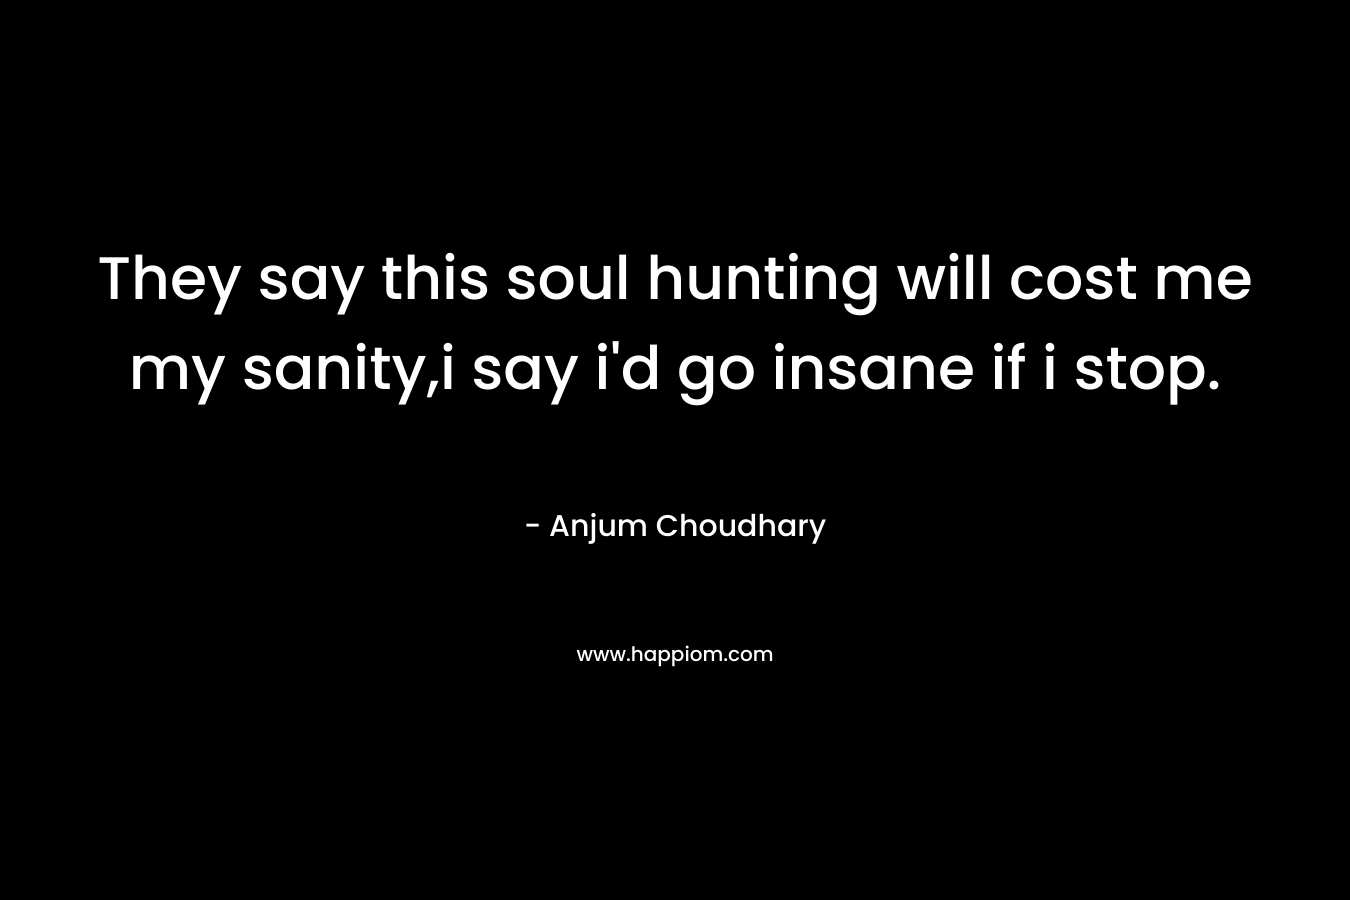 They say this soul hunting will cost me my sanity,i say i’d go insane if i stop. – Anjum Choudhary